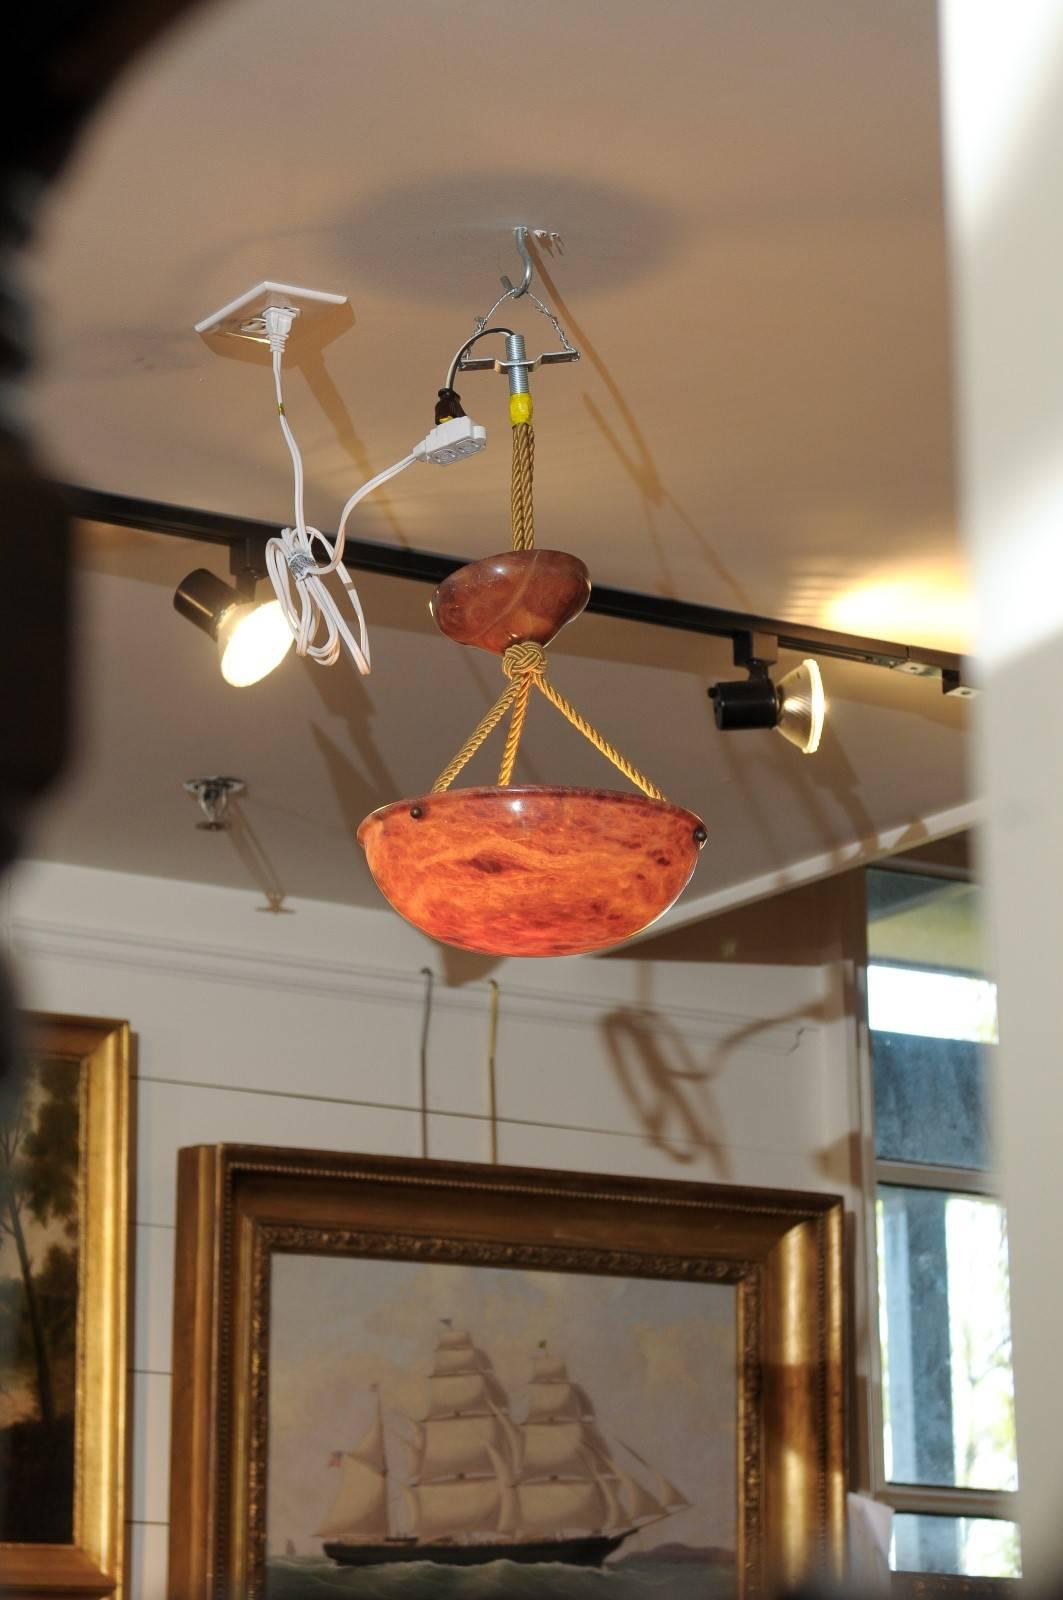 An Art Deco alabaster Swedish light fixture. This orange alabaster small size ceiling hanging light fixture features a curved central bowl suspended to the canopy on cords. The canopy height is adjustable. This warm colored Swedish alabaster pendant